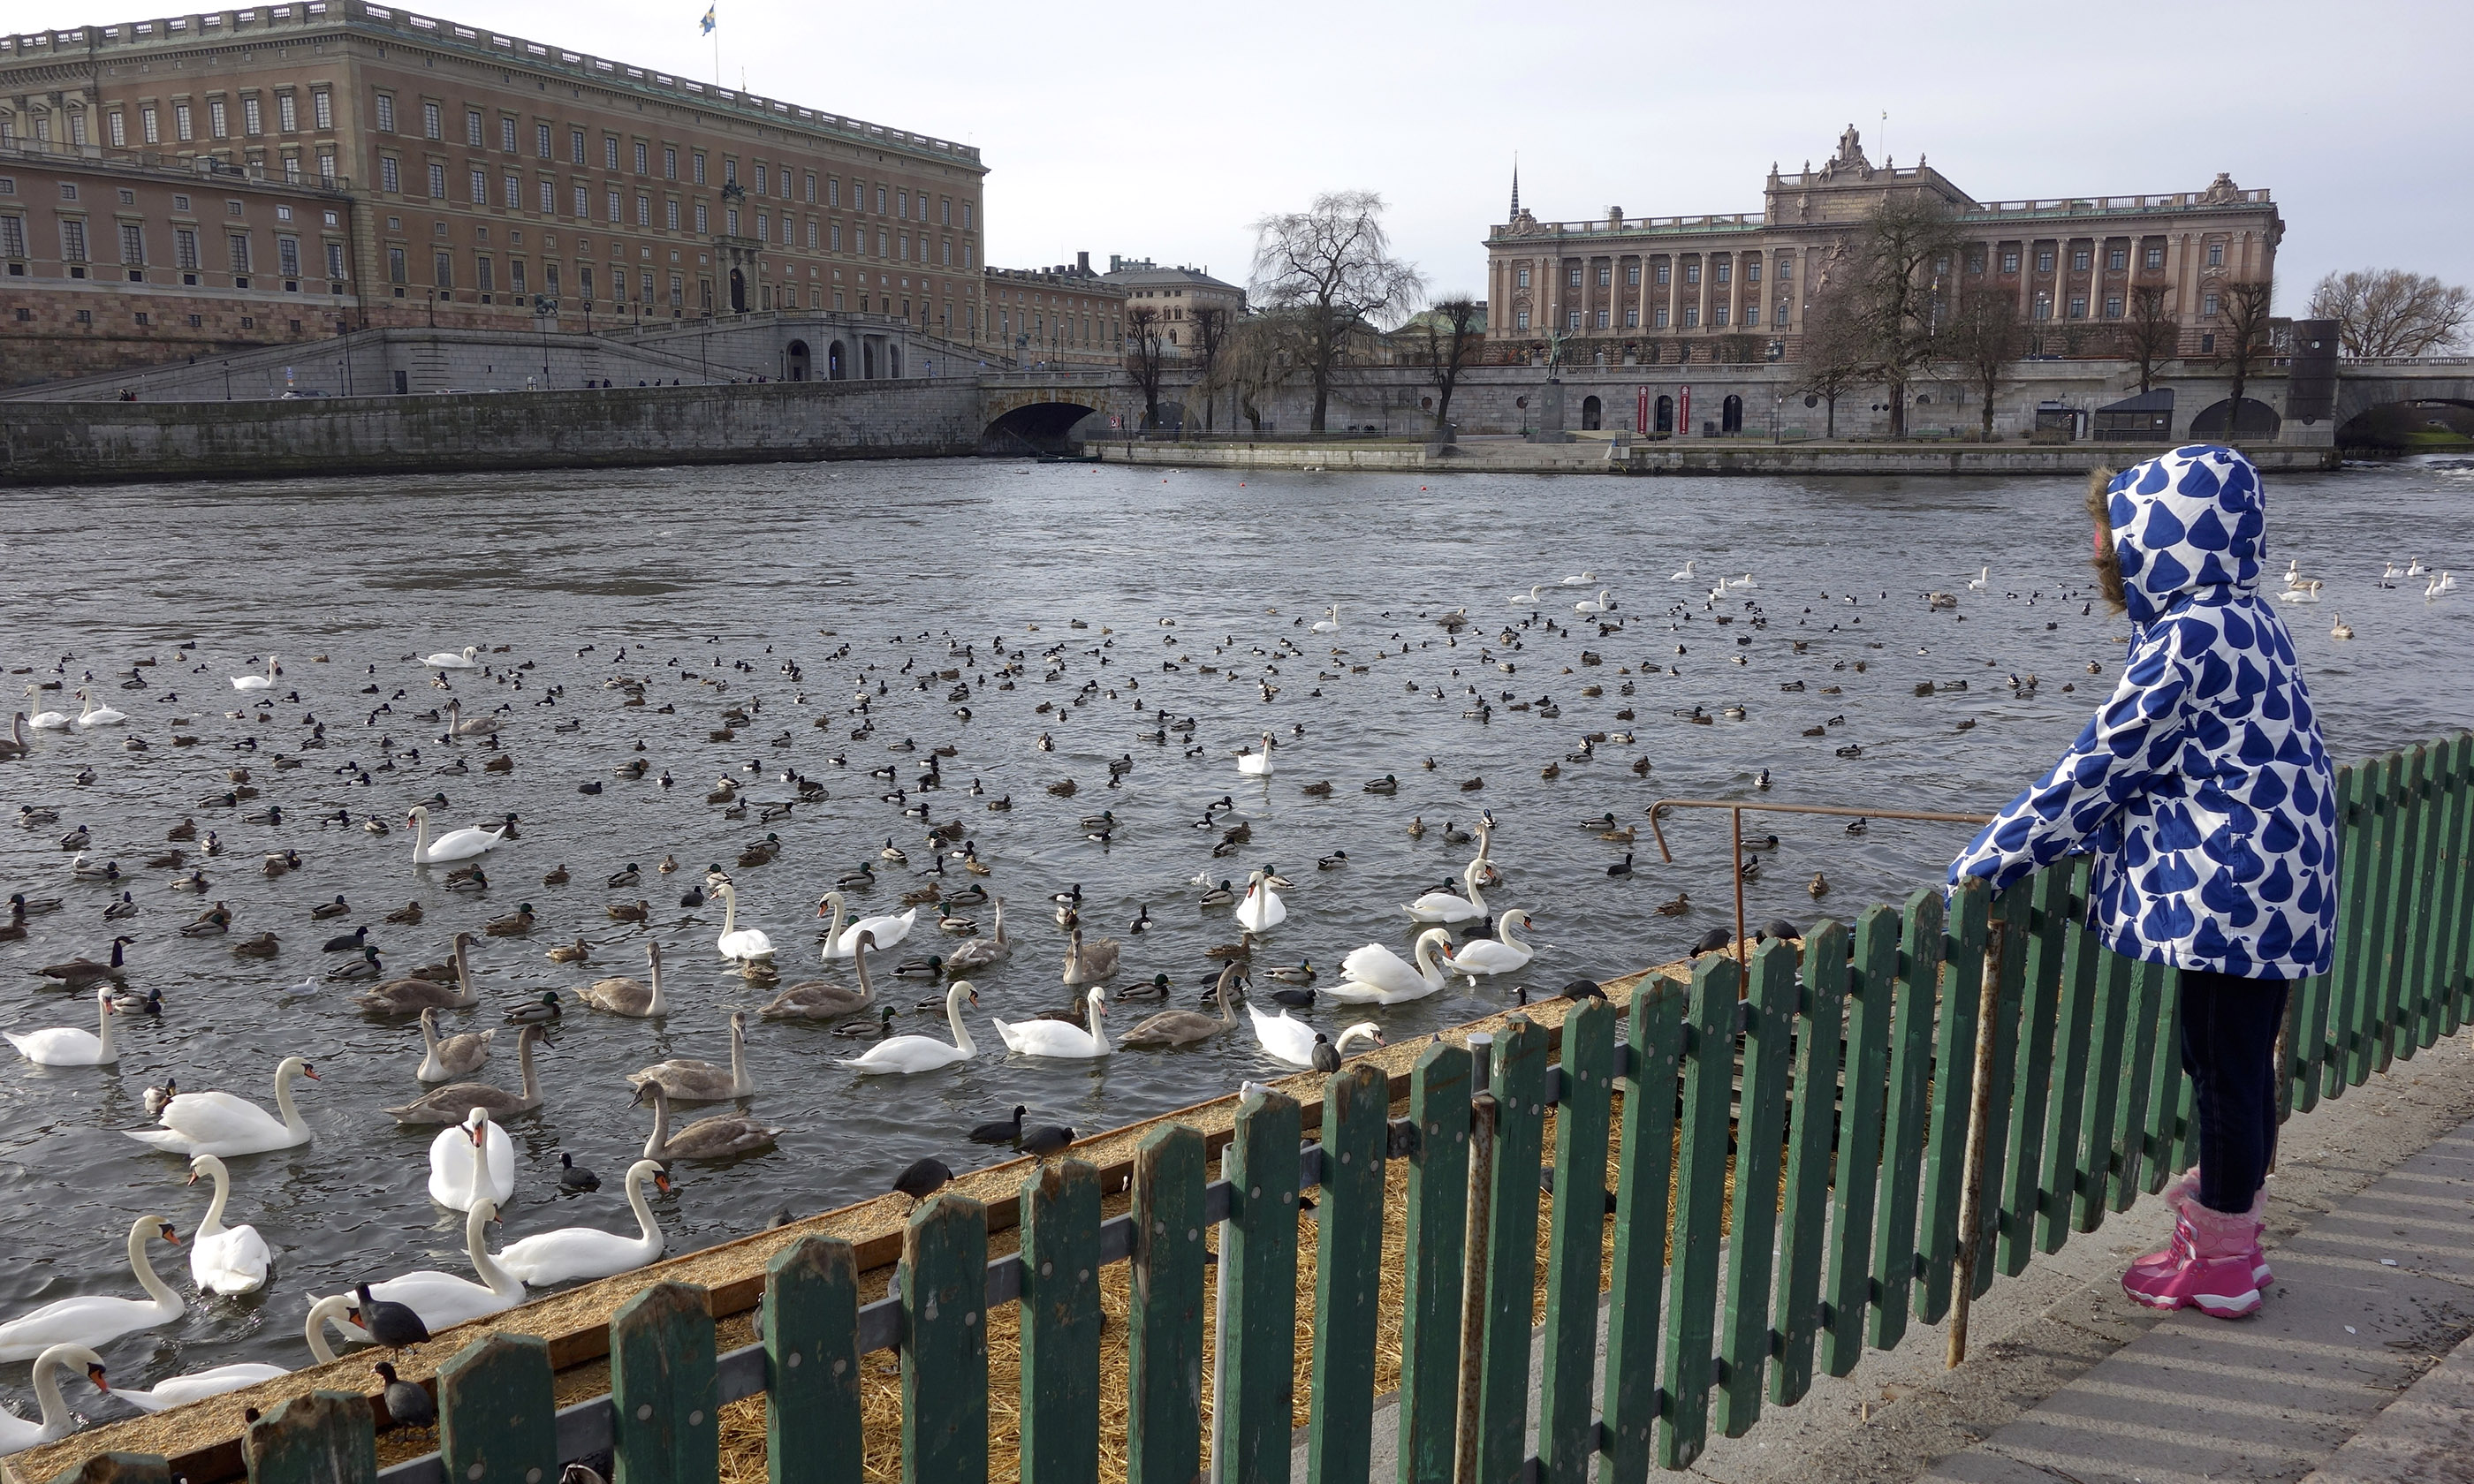 Ducks in front of the Royal Palace, Stockholm (Peter Moore)